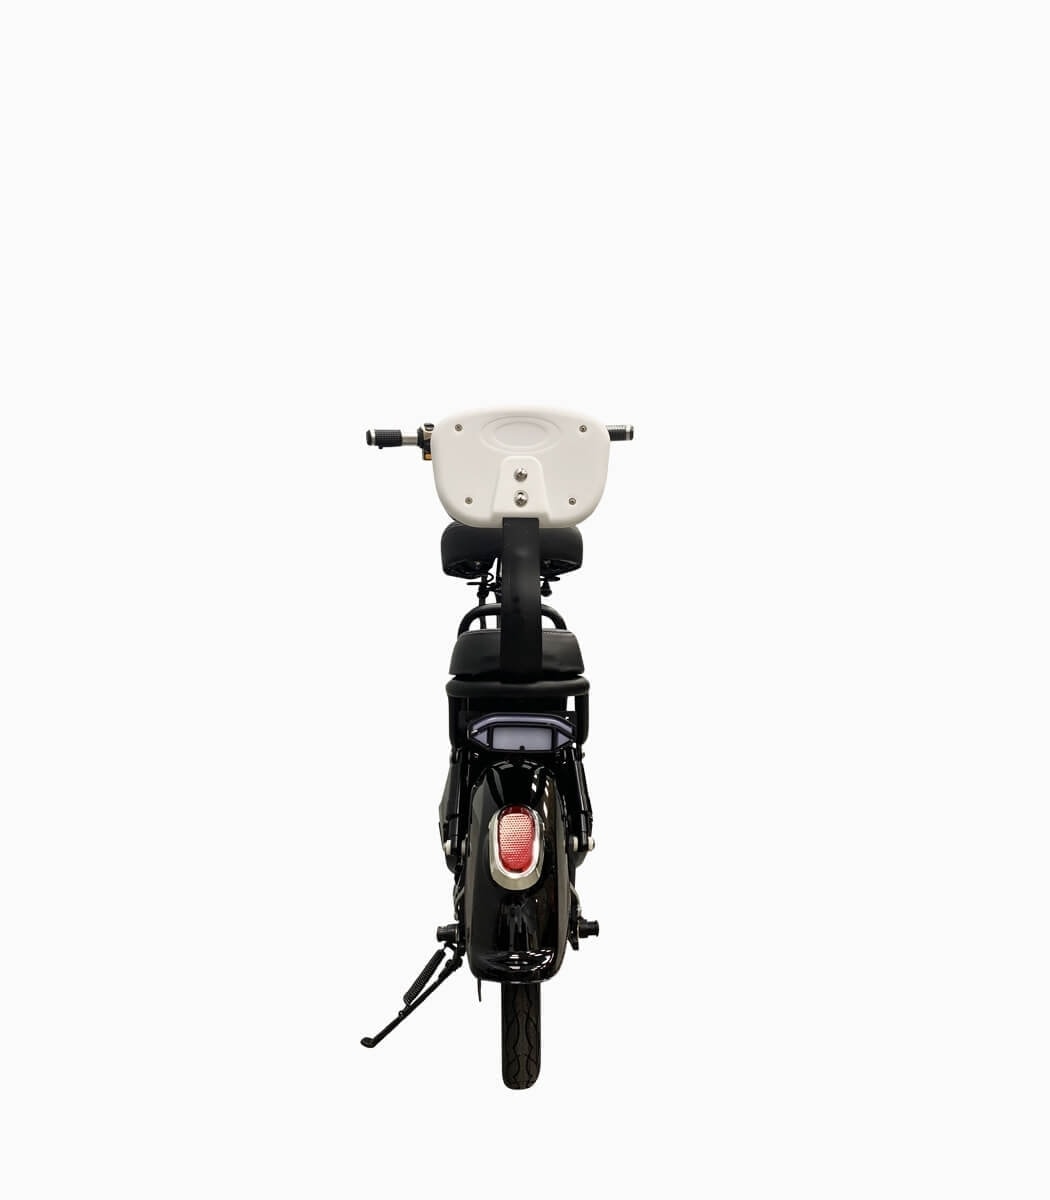 MOBOT EV 2 UL2272 (BLACK10AH) certified seated electric scooter rear